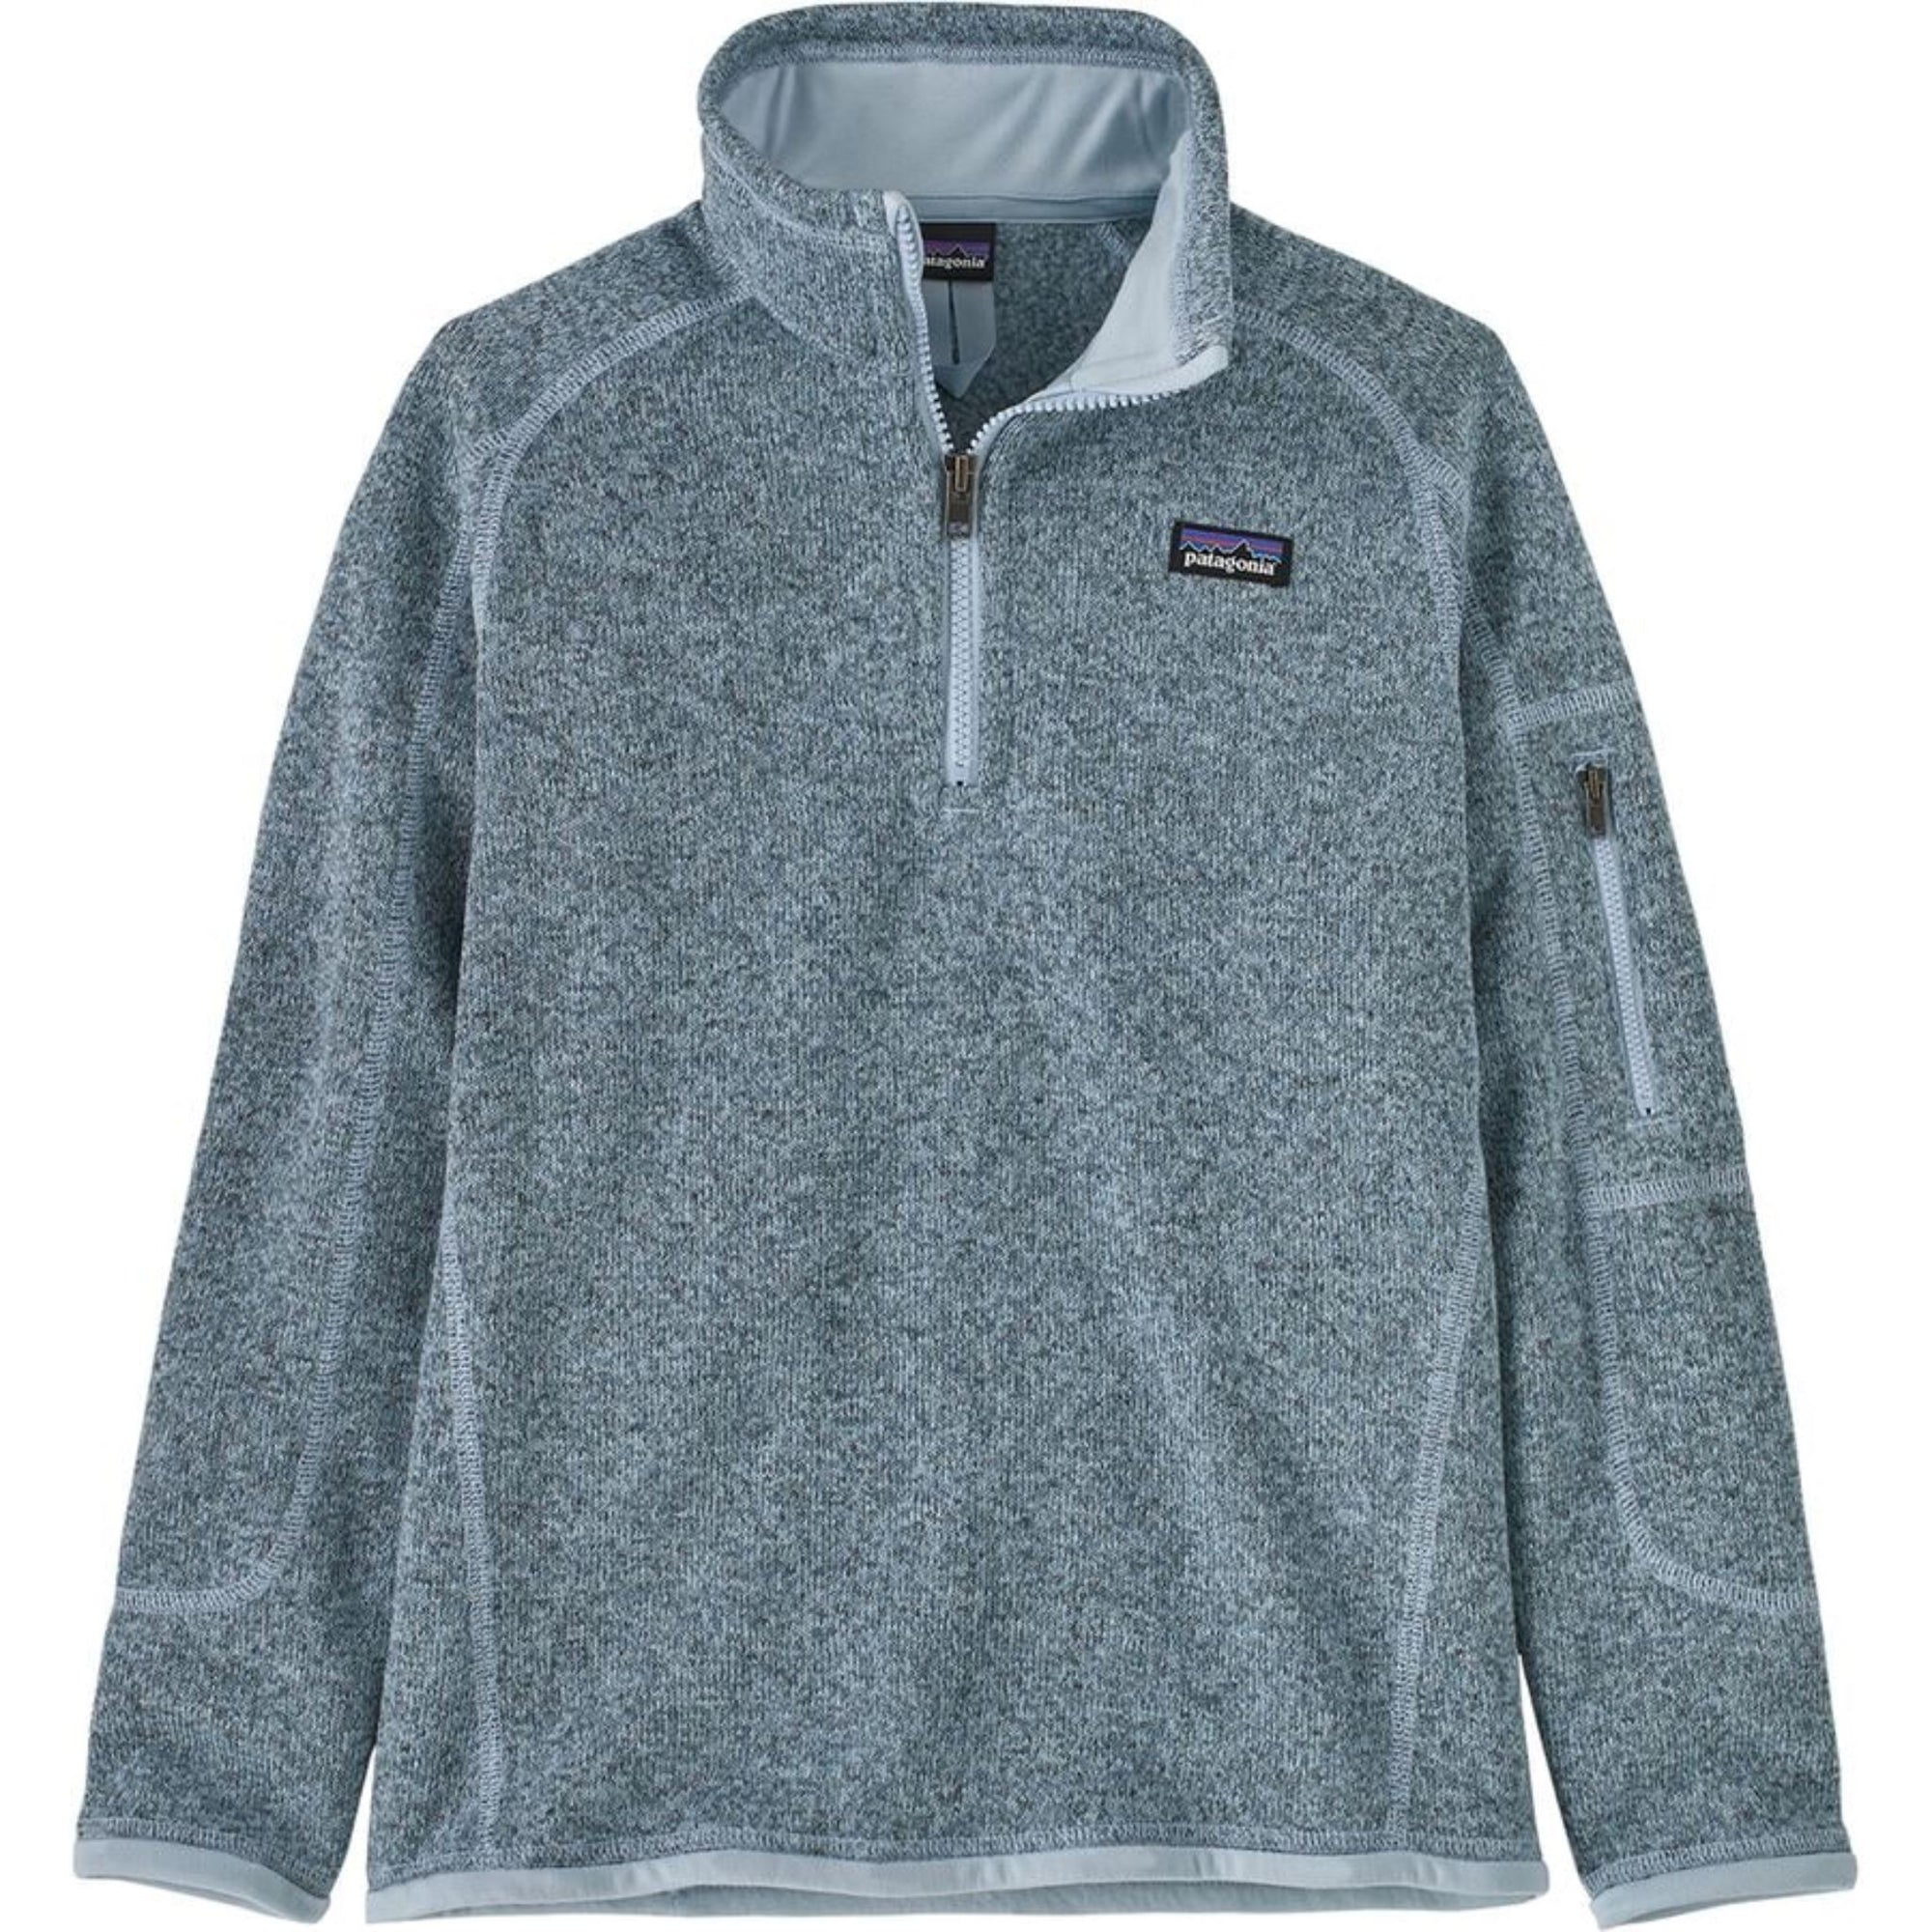 Kids Patagonia Better Sweater 1/4 Zip - Steam Blue Mid Layers Patagonia XS INTL / 5-6 AU 